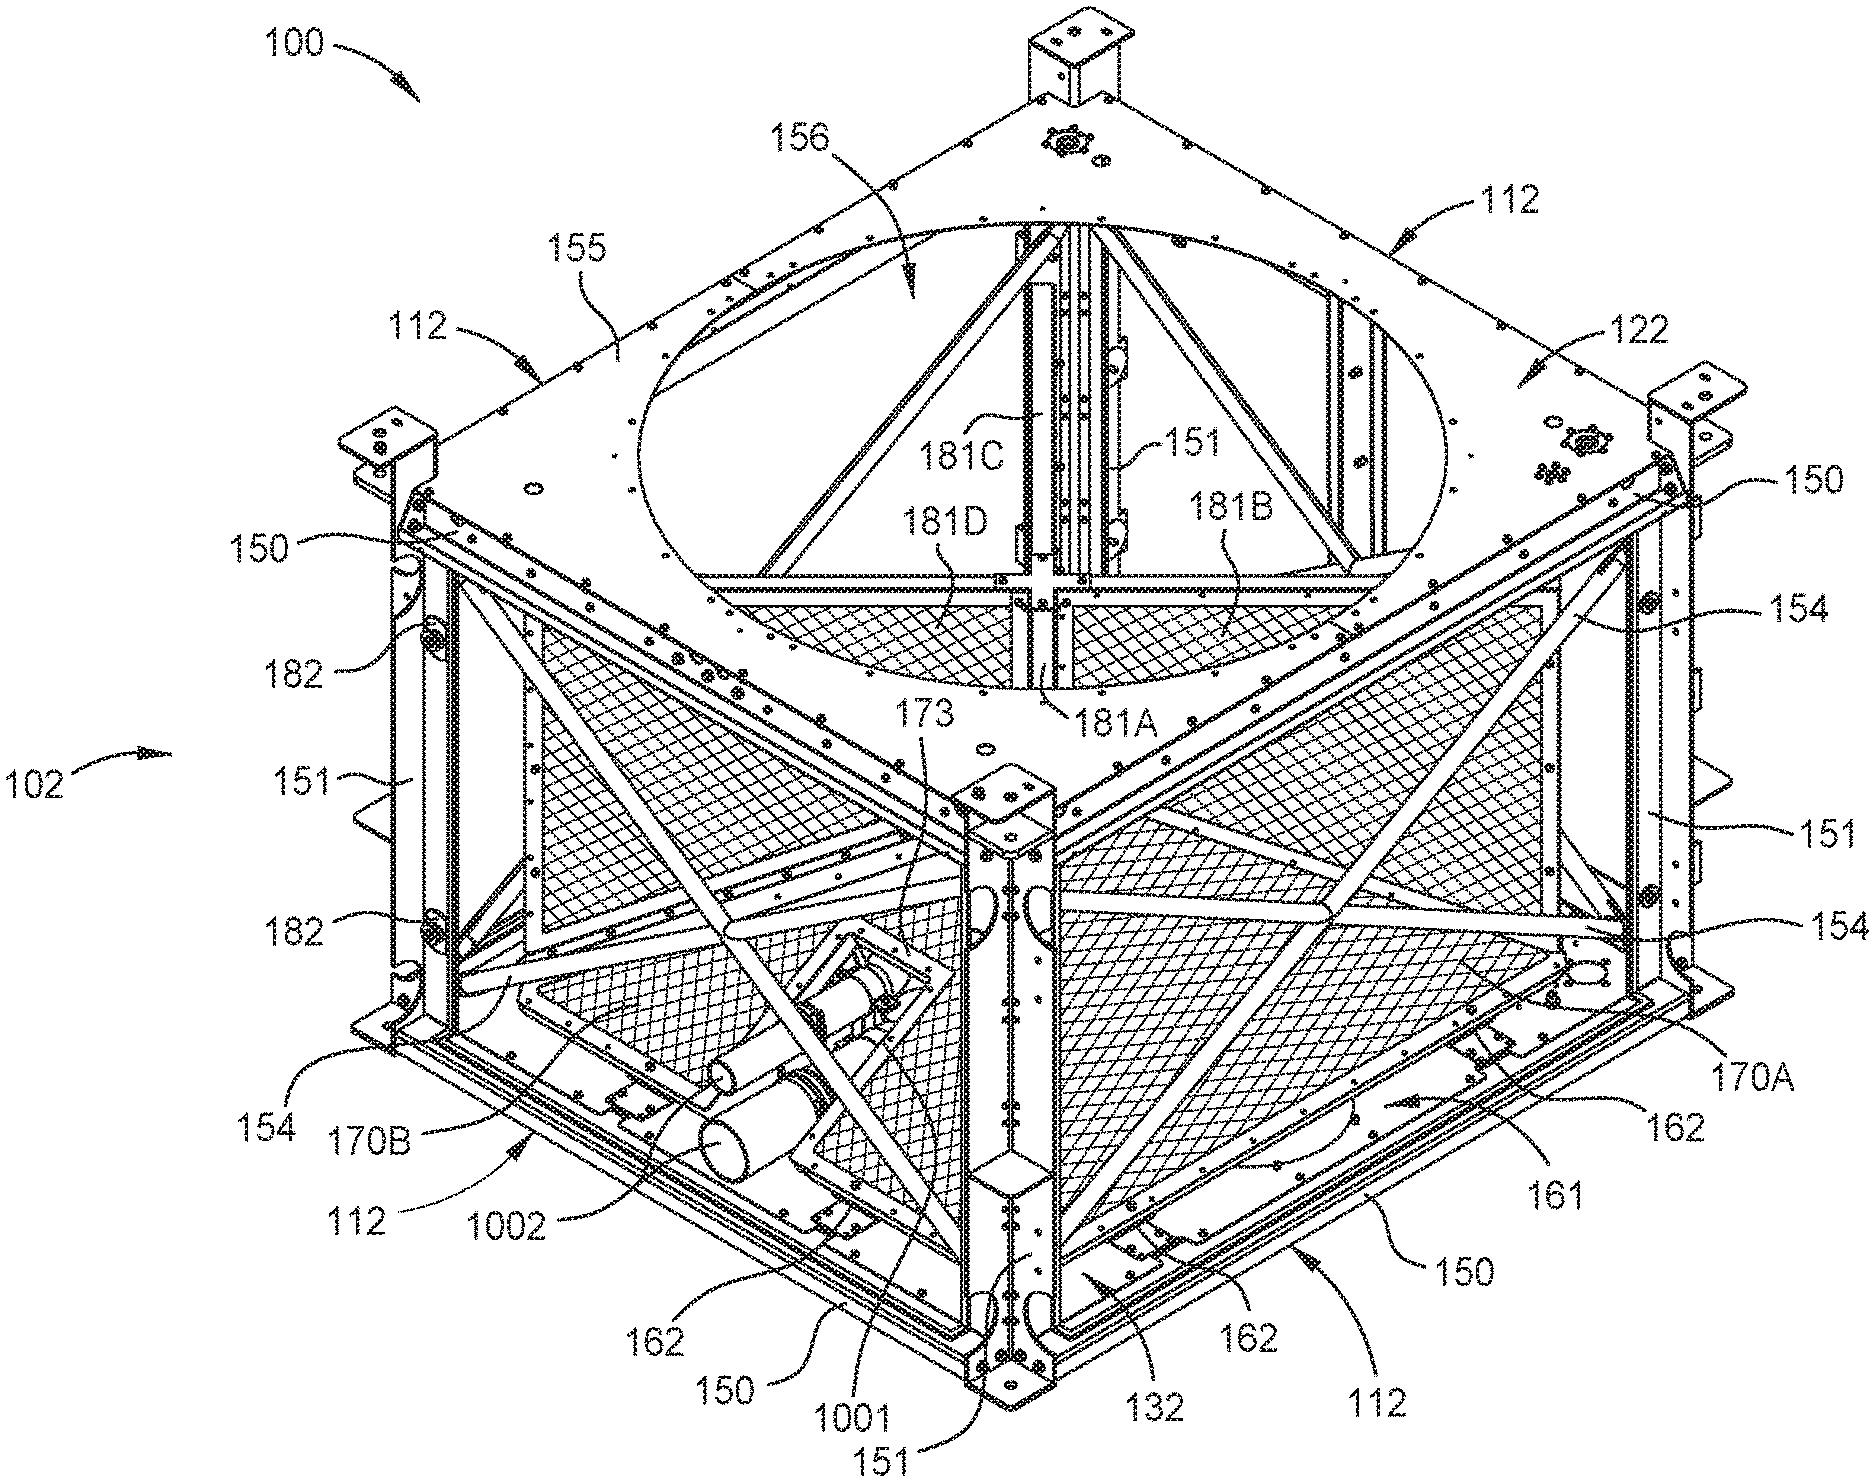 Forum Energy Technologies Inc Patent: Noise Suppression Vertical Curtain Apparatus - Offshore Technology